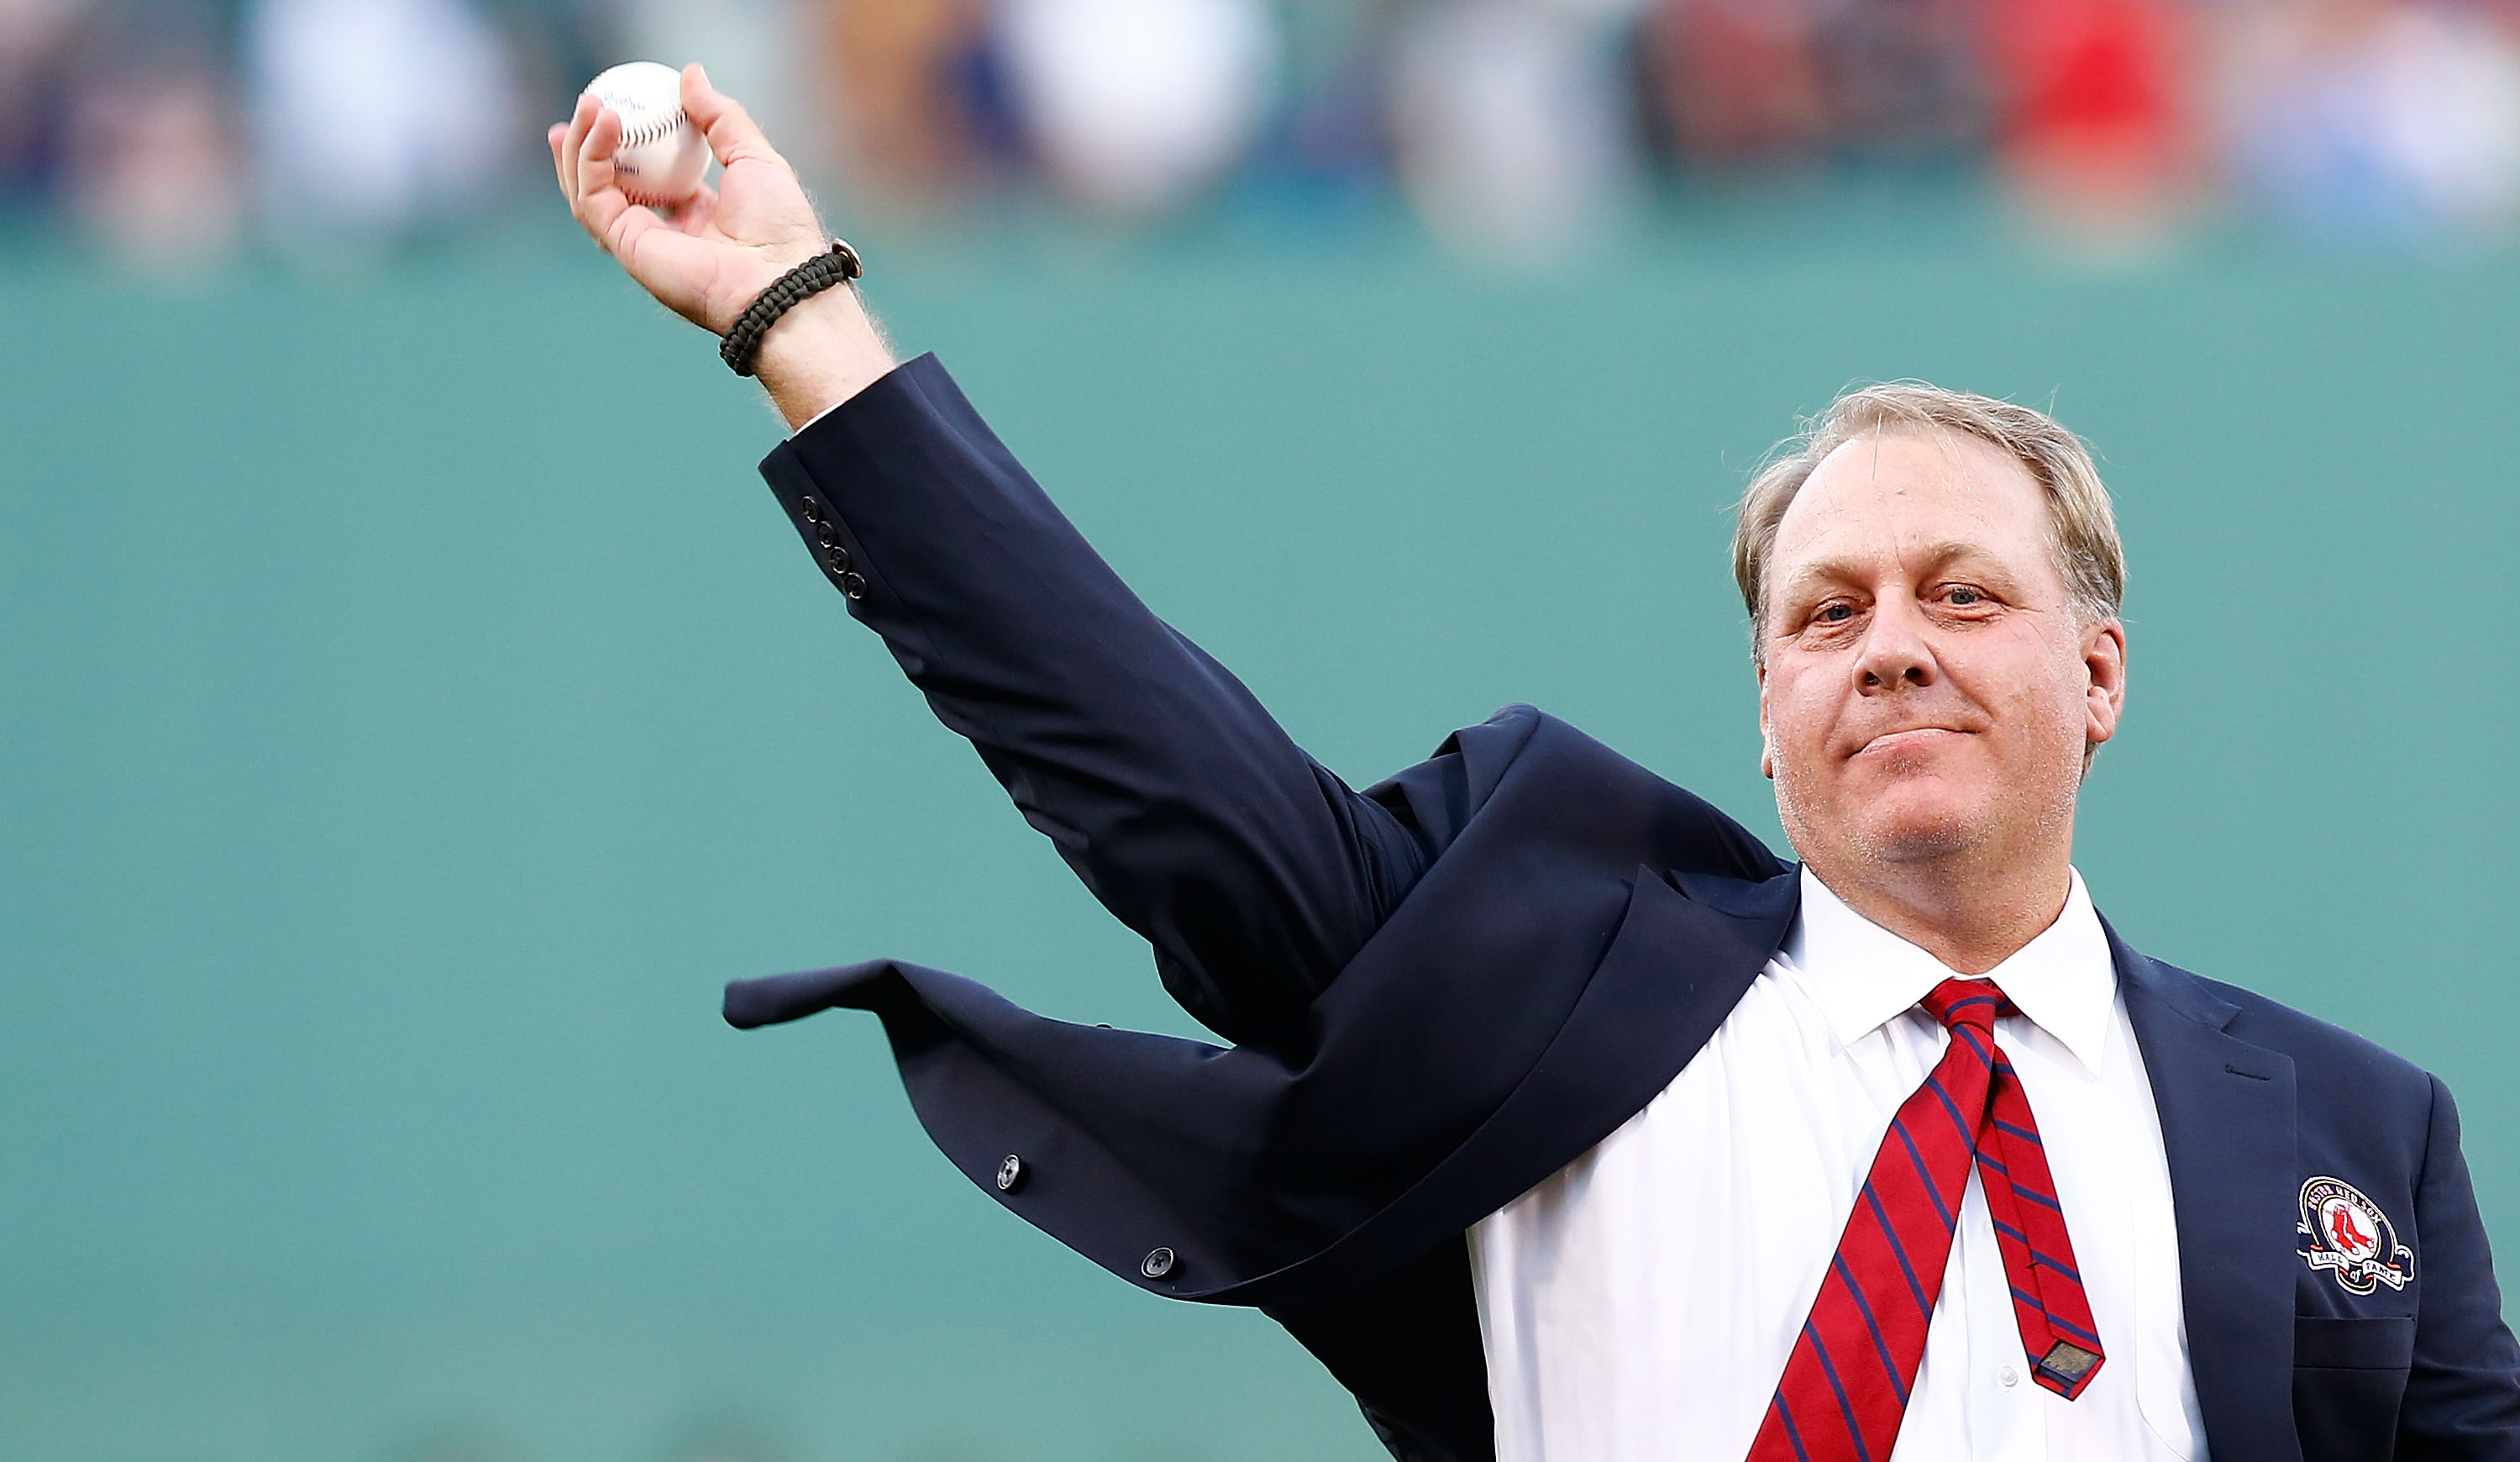 Curt Schilling Transgender: From 3× World Series champion to getting sacked  by ESPN for anti-transgender stance: The Red Sox veteran Curt Schilling's  backstory behind HOF snub